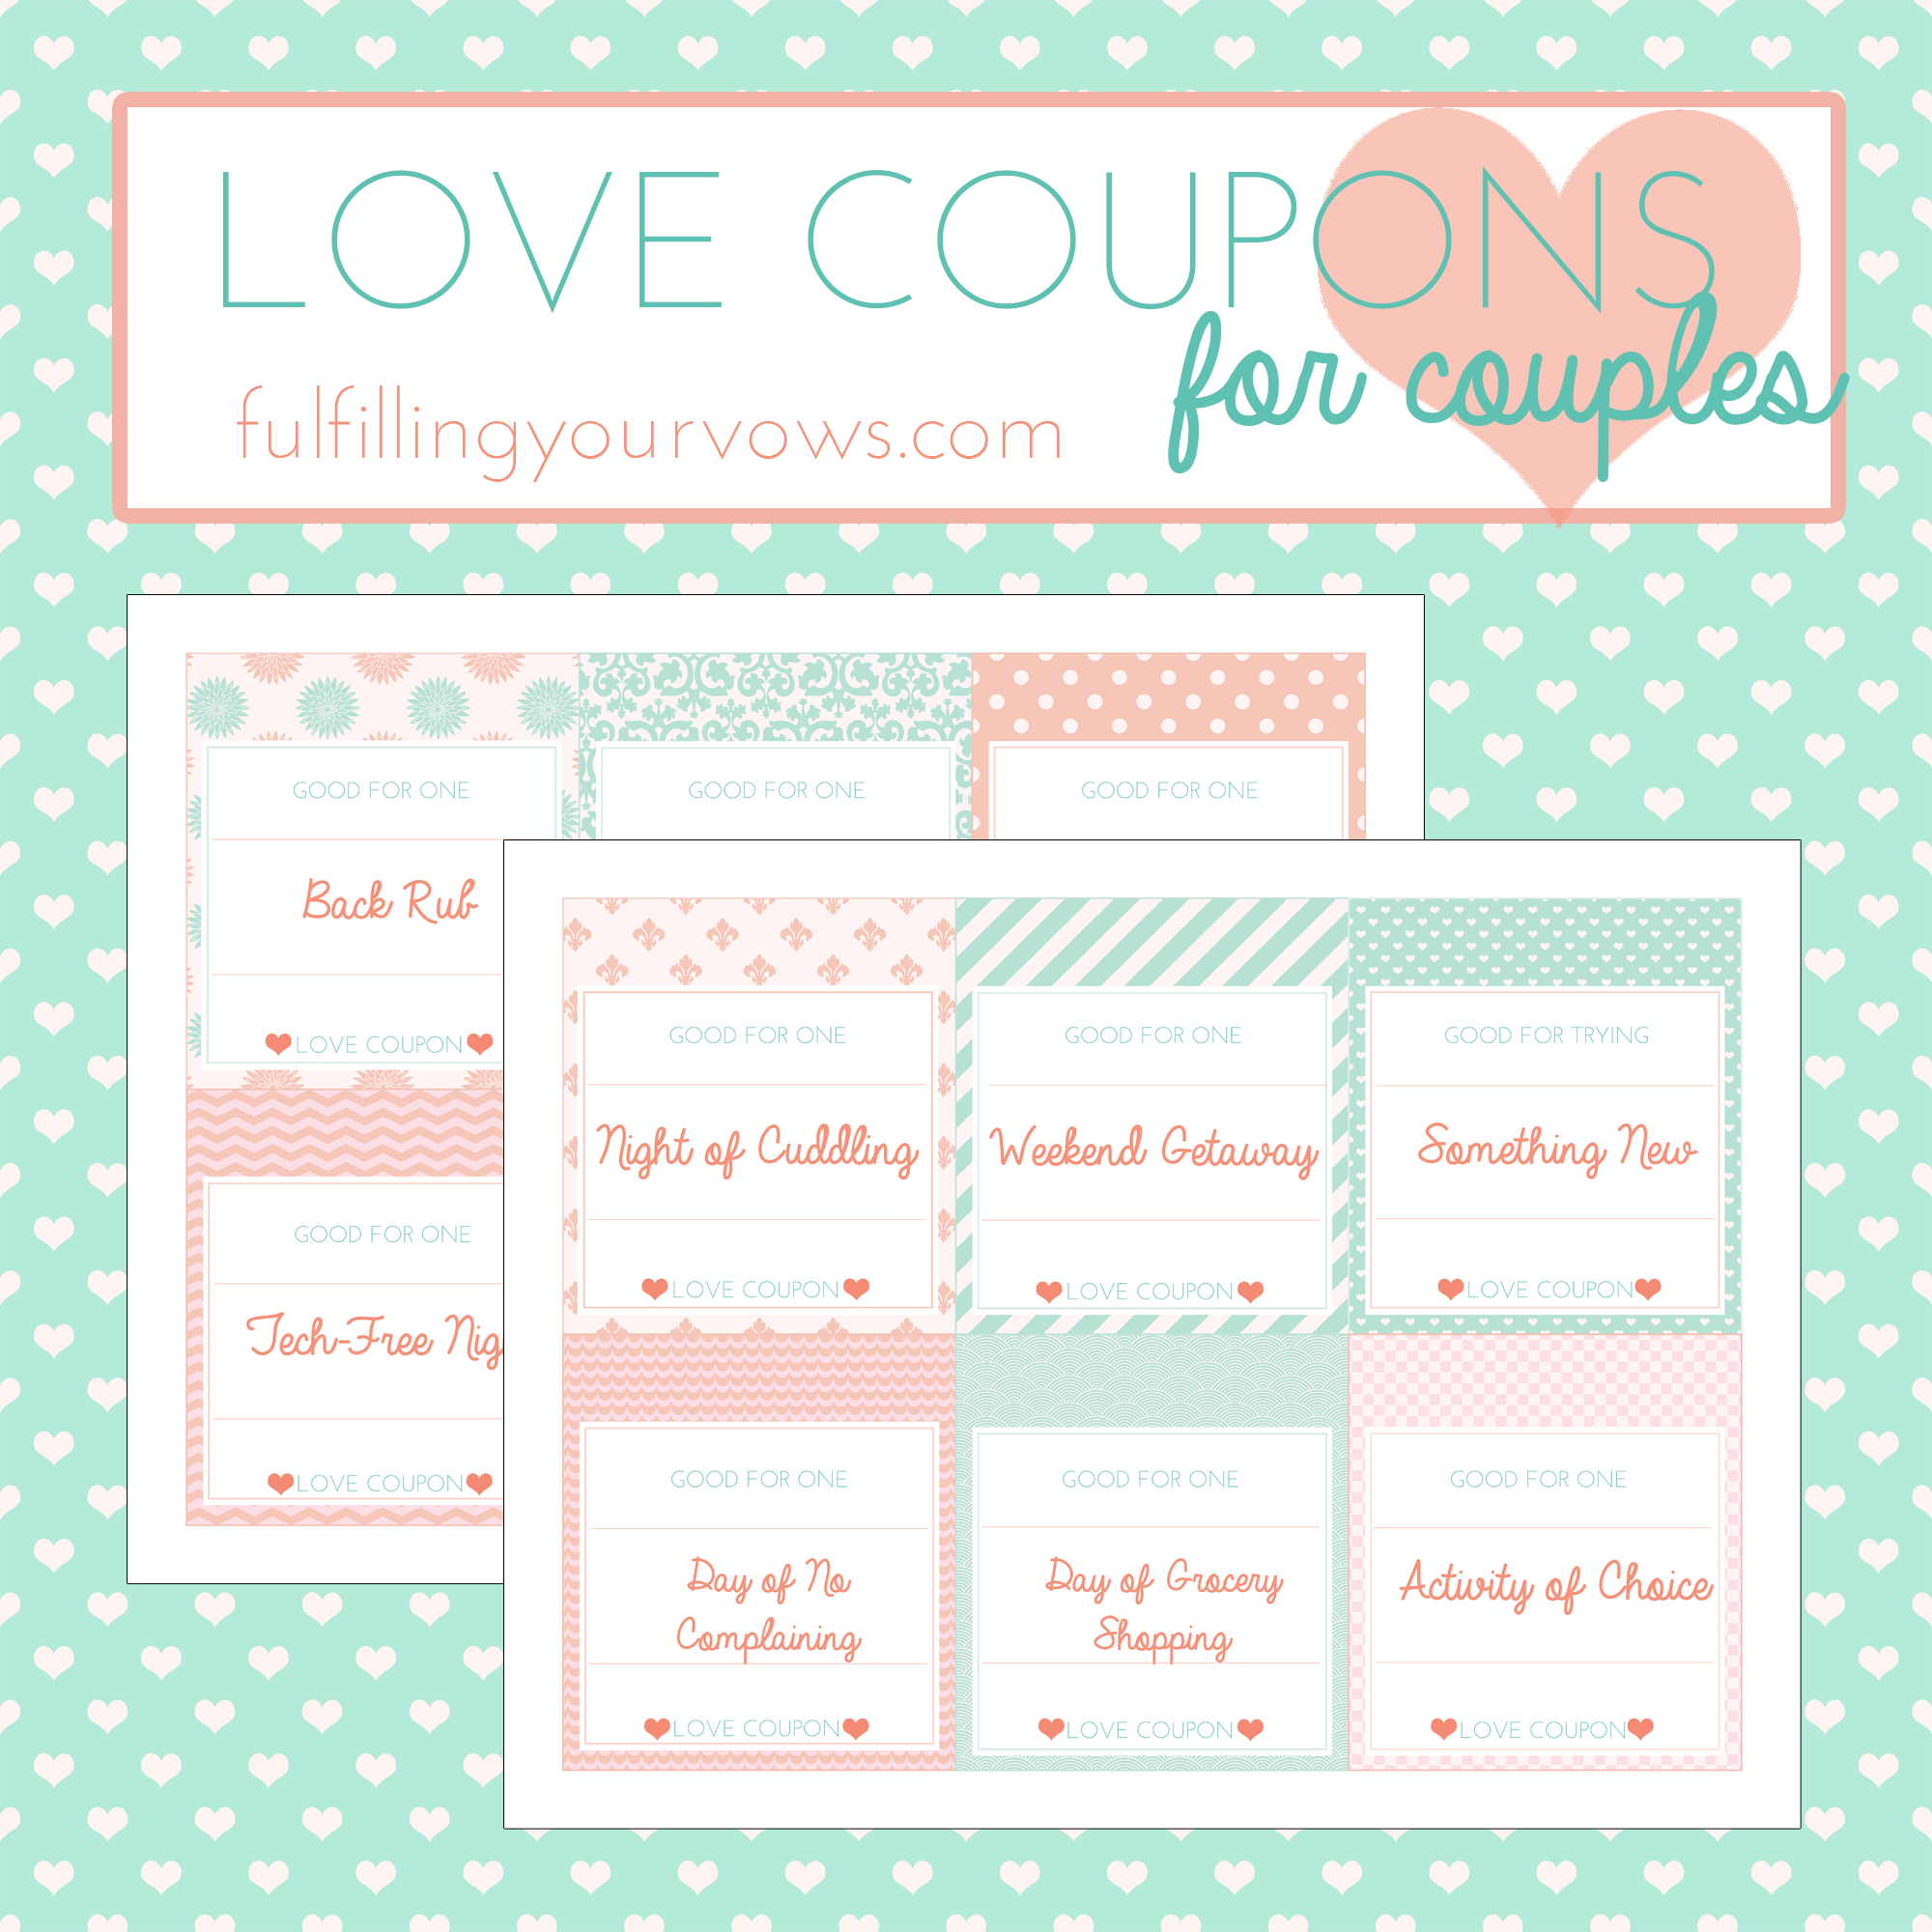 Free Printable Love Coupons For Couples - Fulfilling Your Vows - Free Printable Coupons For Husband